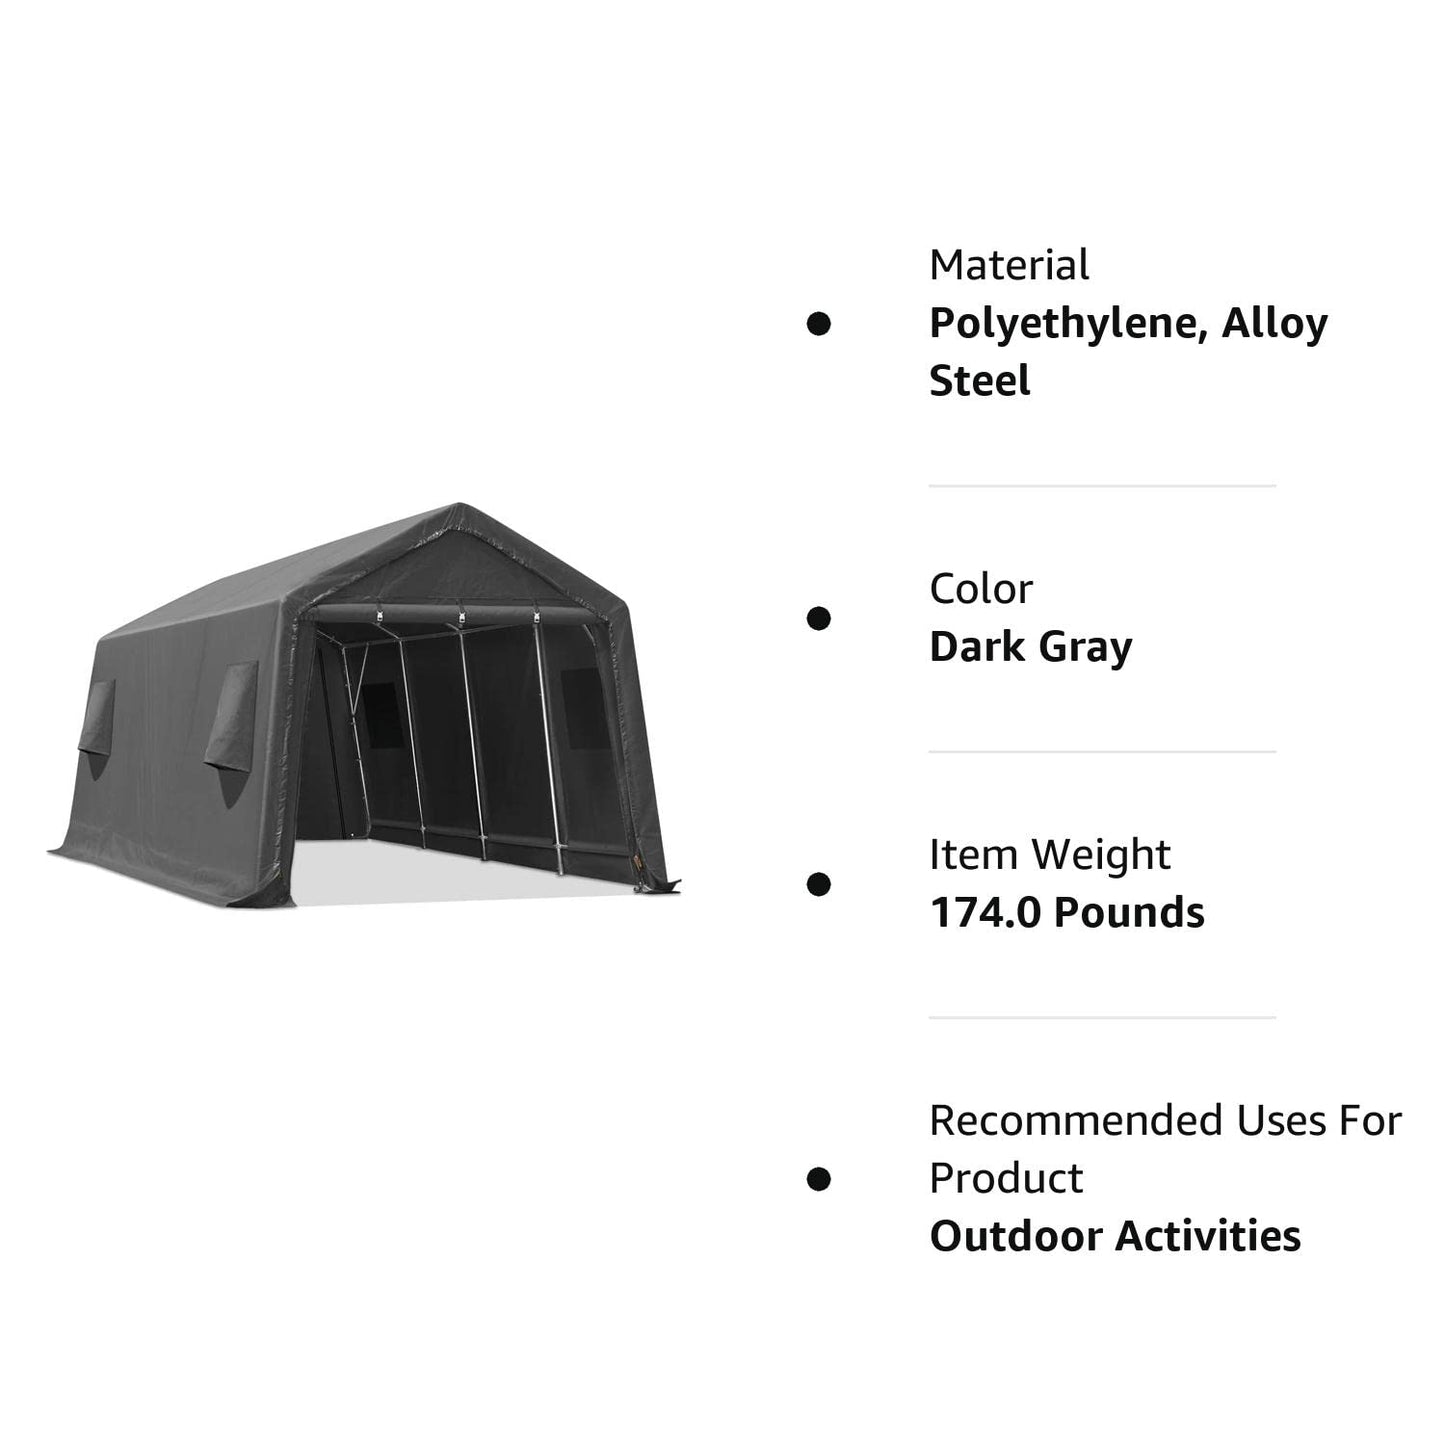 ADVANCE OUTDOOR 10X20 ft Carport Heavy Duty Outdoor Patio Anti-Snow Portable Canopy Storage Shelter Shed with 2 Rolled up Zipper Doors & Vents for Snowmobile Garden Tools, Gray, (8808DGY-1) 10'x20' Dark Gray